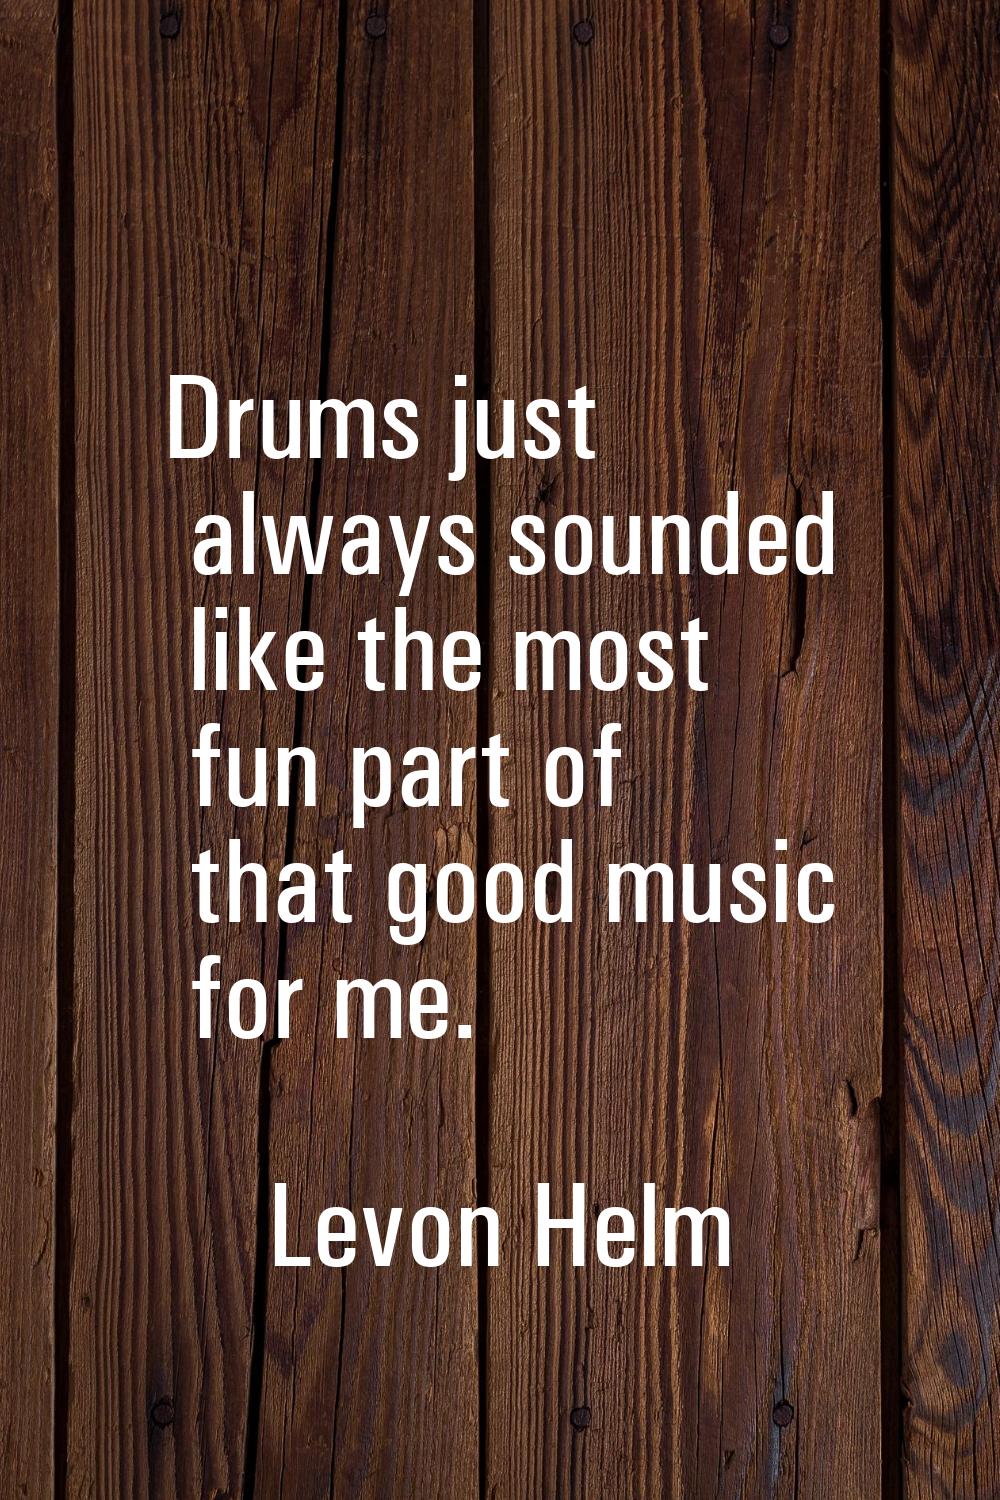 Drums just always sounded like the most fun part of that good music for me.